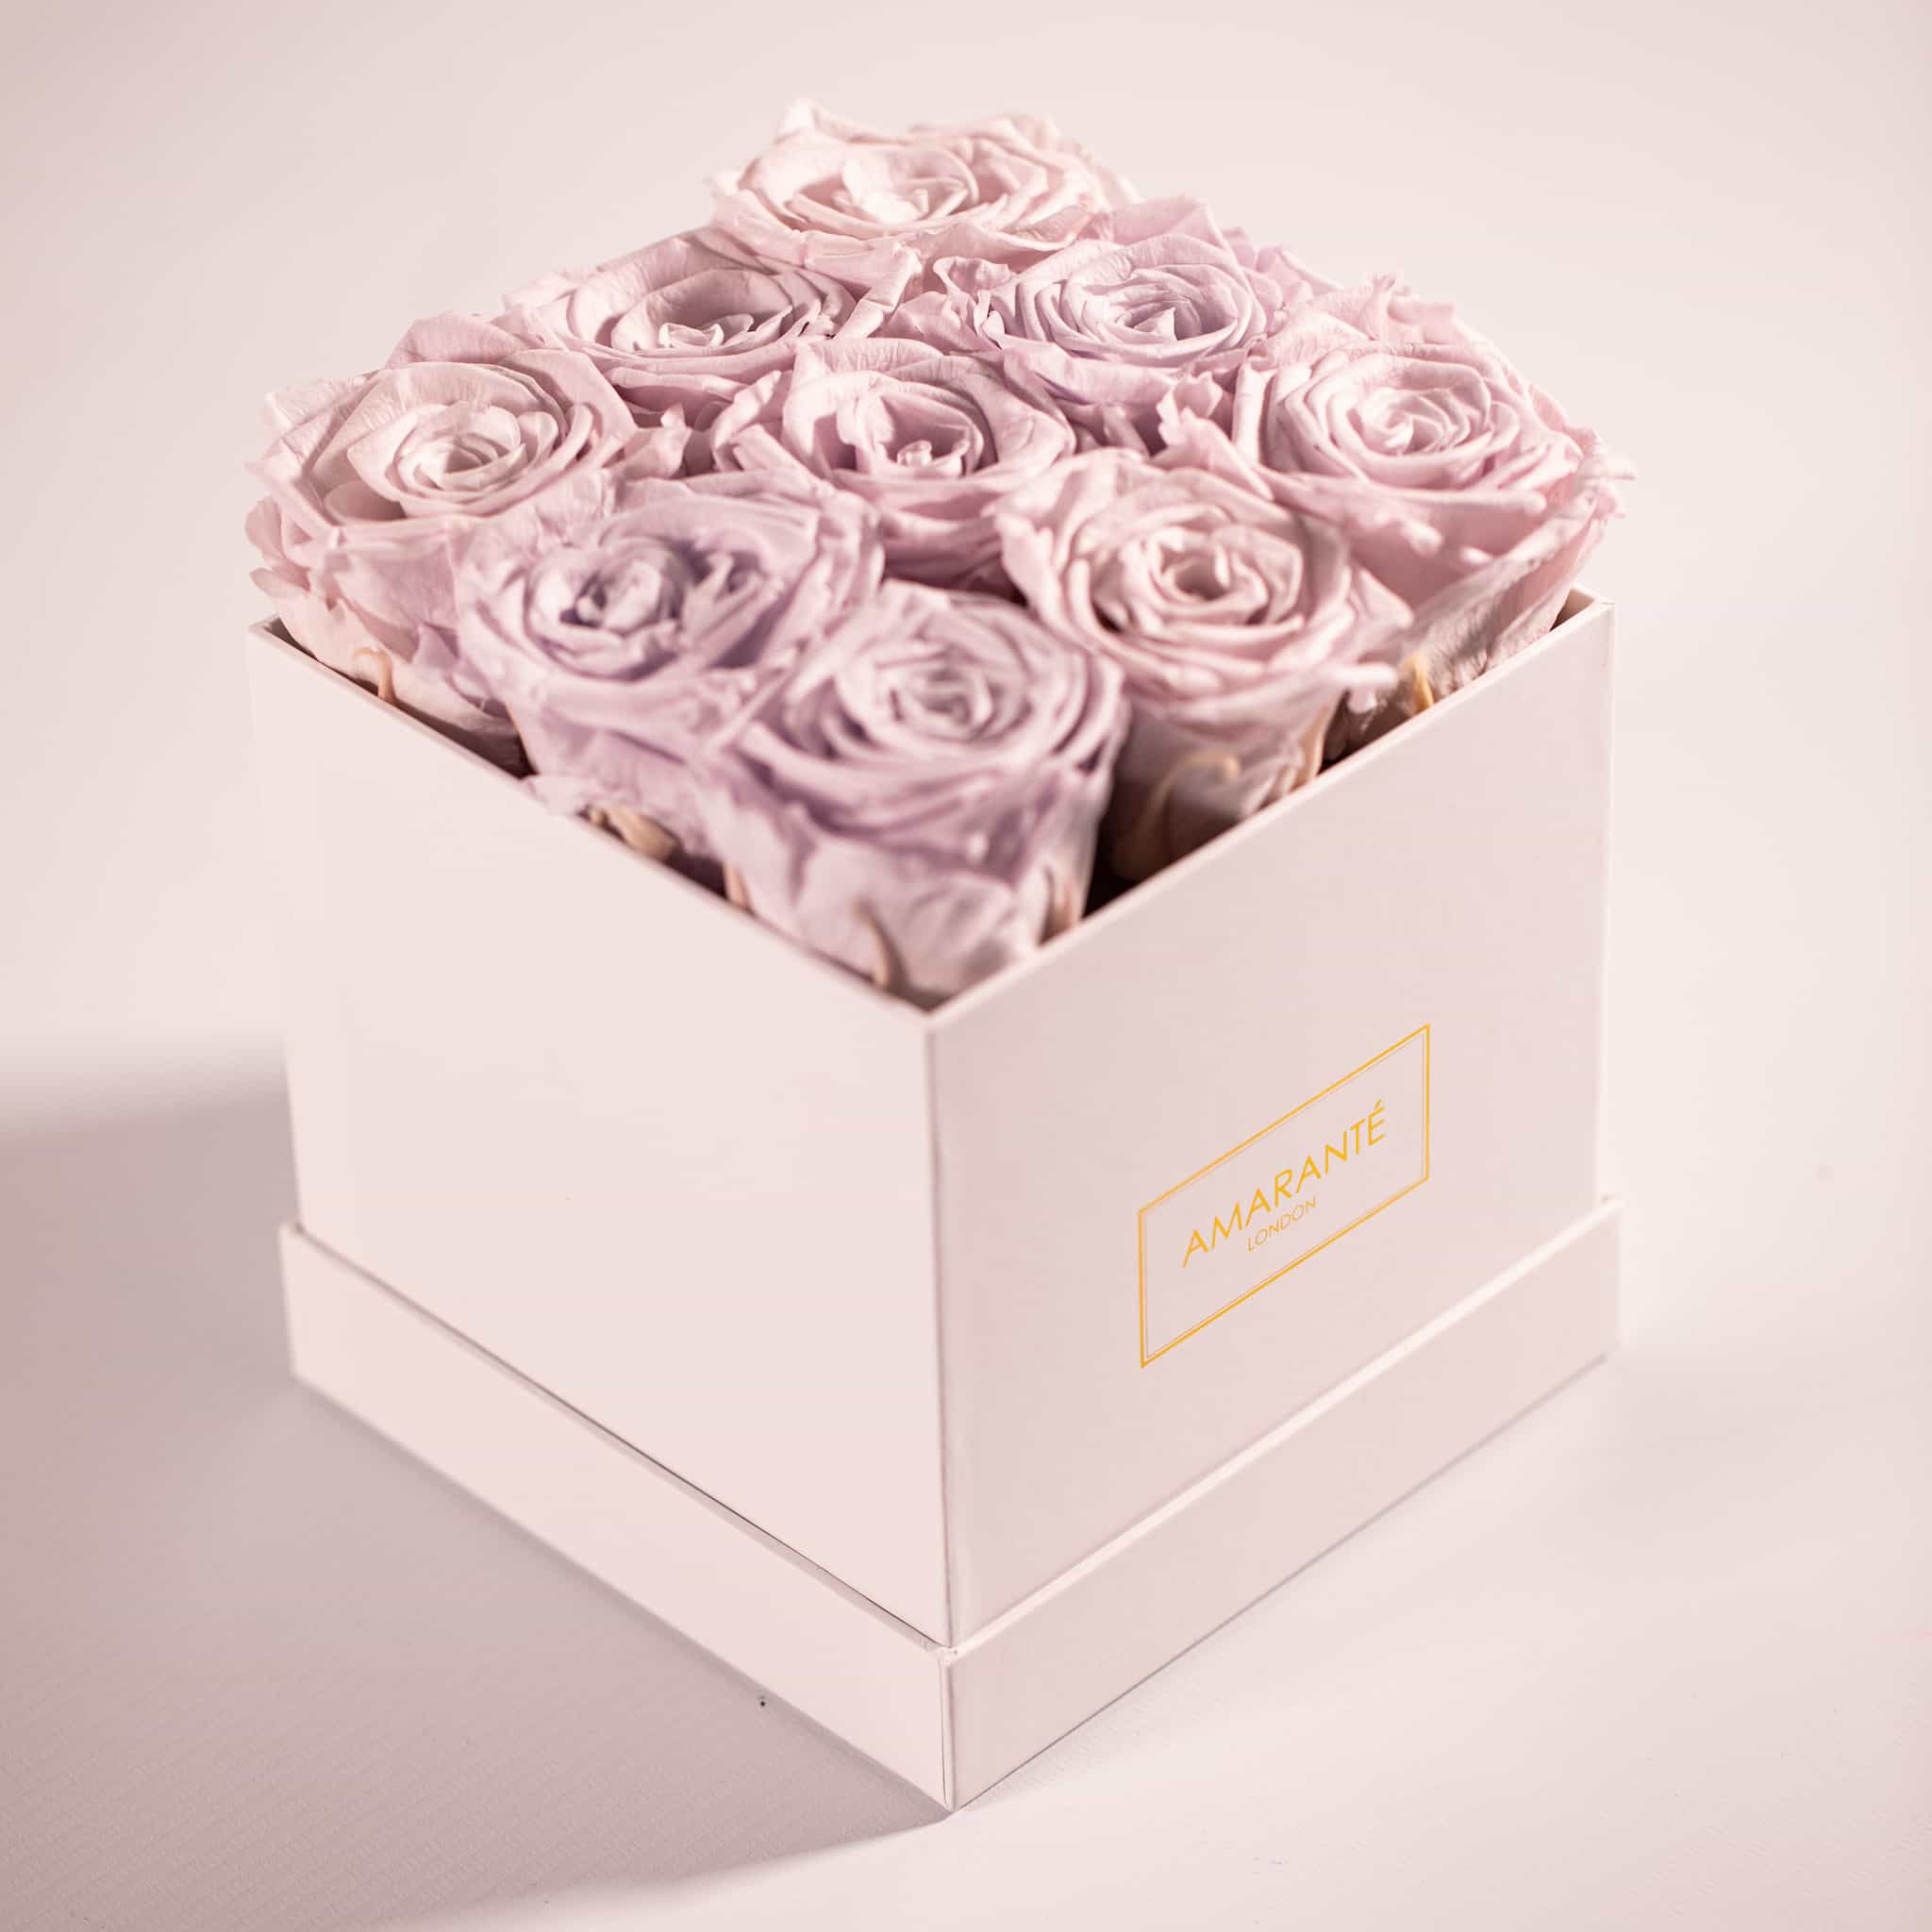 Infinity Rose Hat Box: The Perfect Wedding Gift